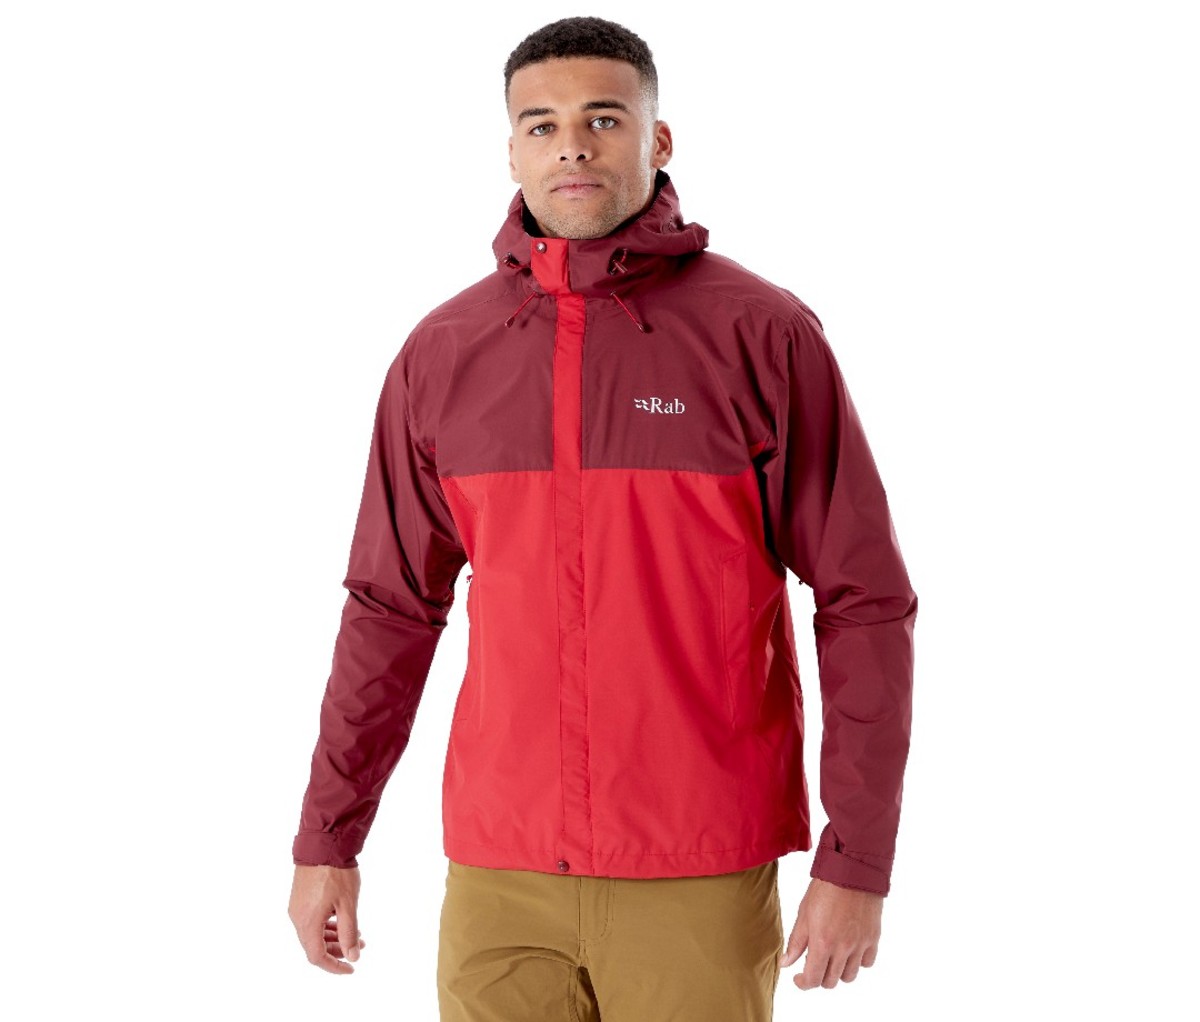 Rab Downpour Eco Jacket: Sustainable Gift Guide